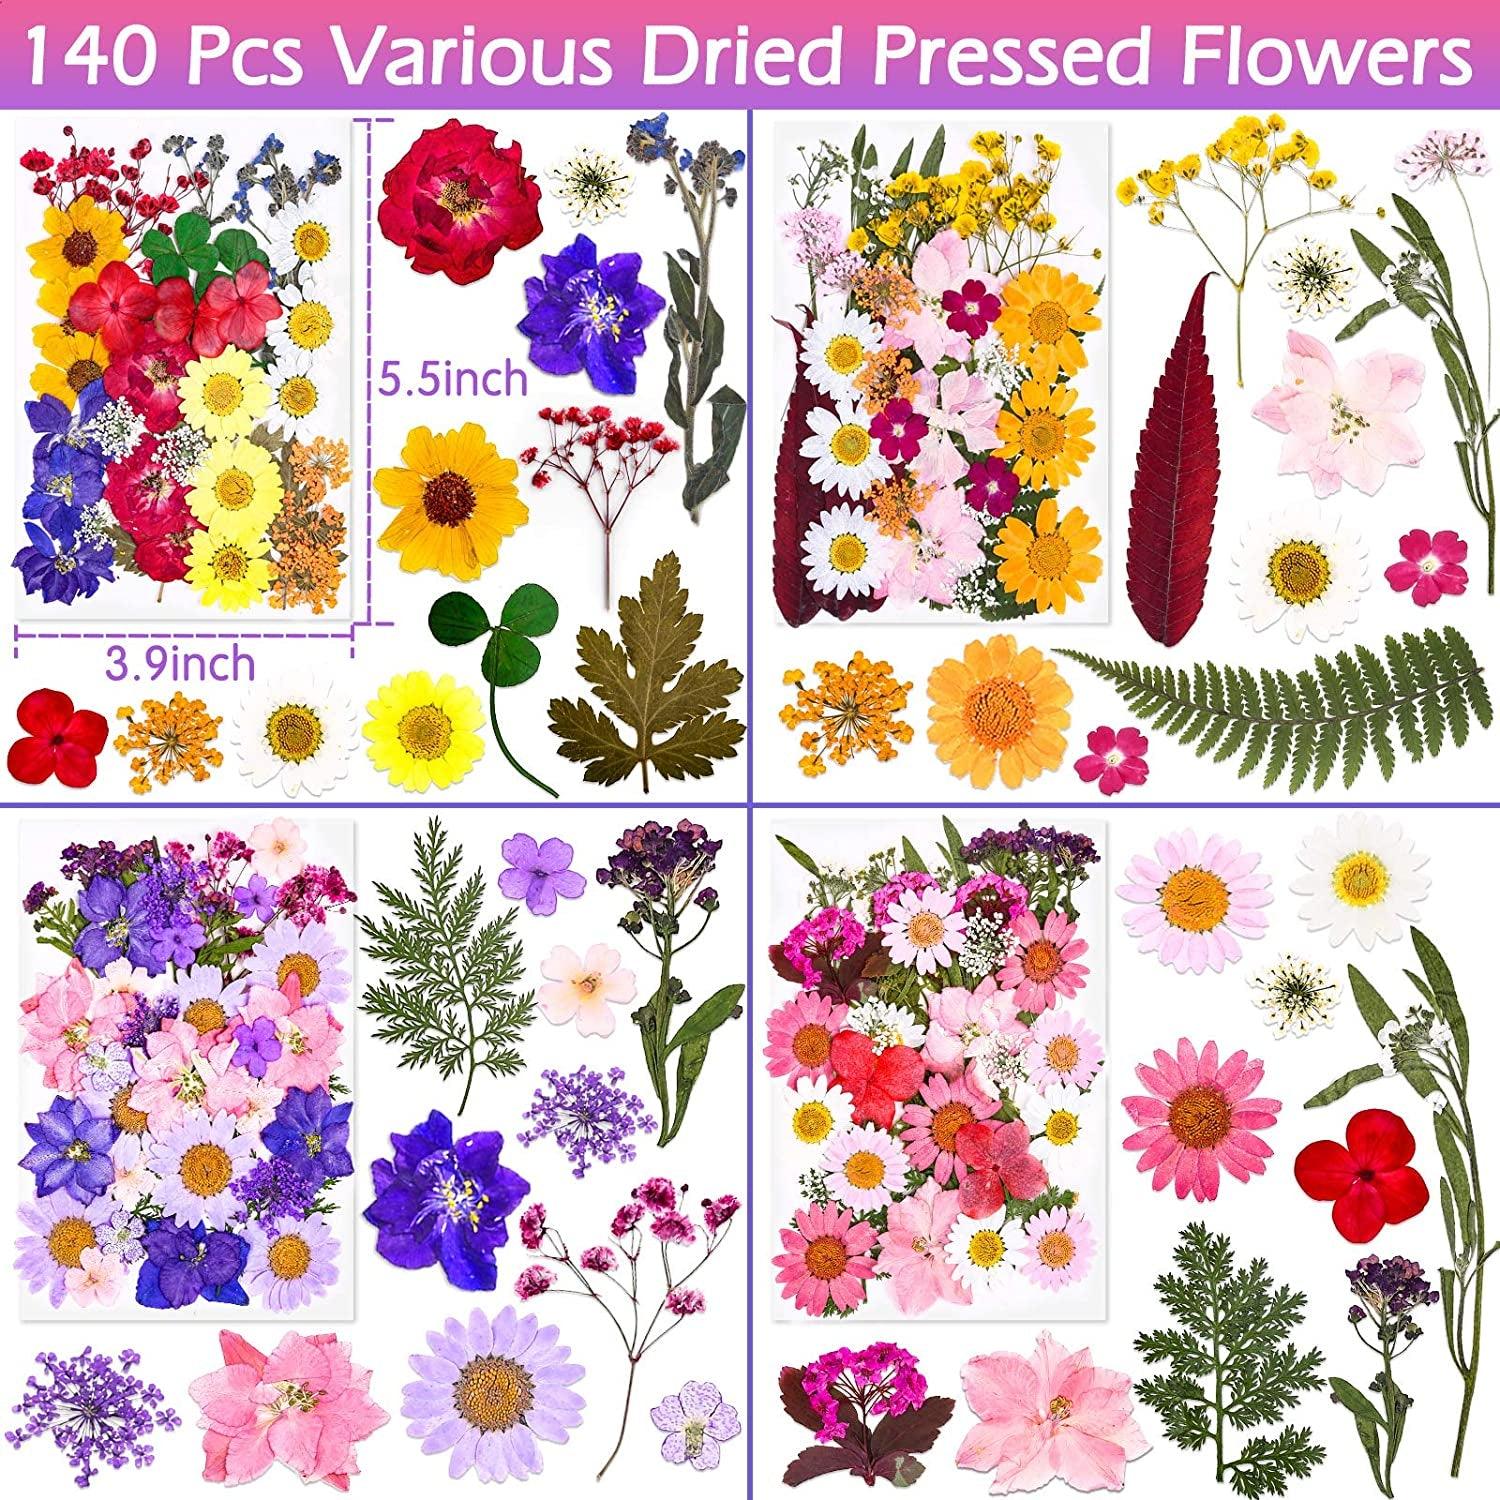 140 Pcs Dried Pressed Flowers for Resin, Real Pressed Flowers Dry Leaves Bulk Natural Herbs Kit for Scrapbooking DIY Art Crafts, Epoxy Resin Jewelry Molds, Candle, Soap Making, Nails Décor - WoodArtSupply